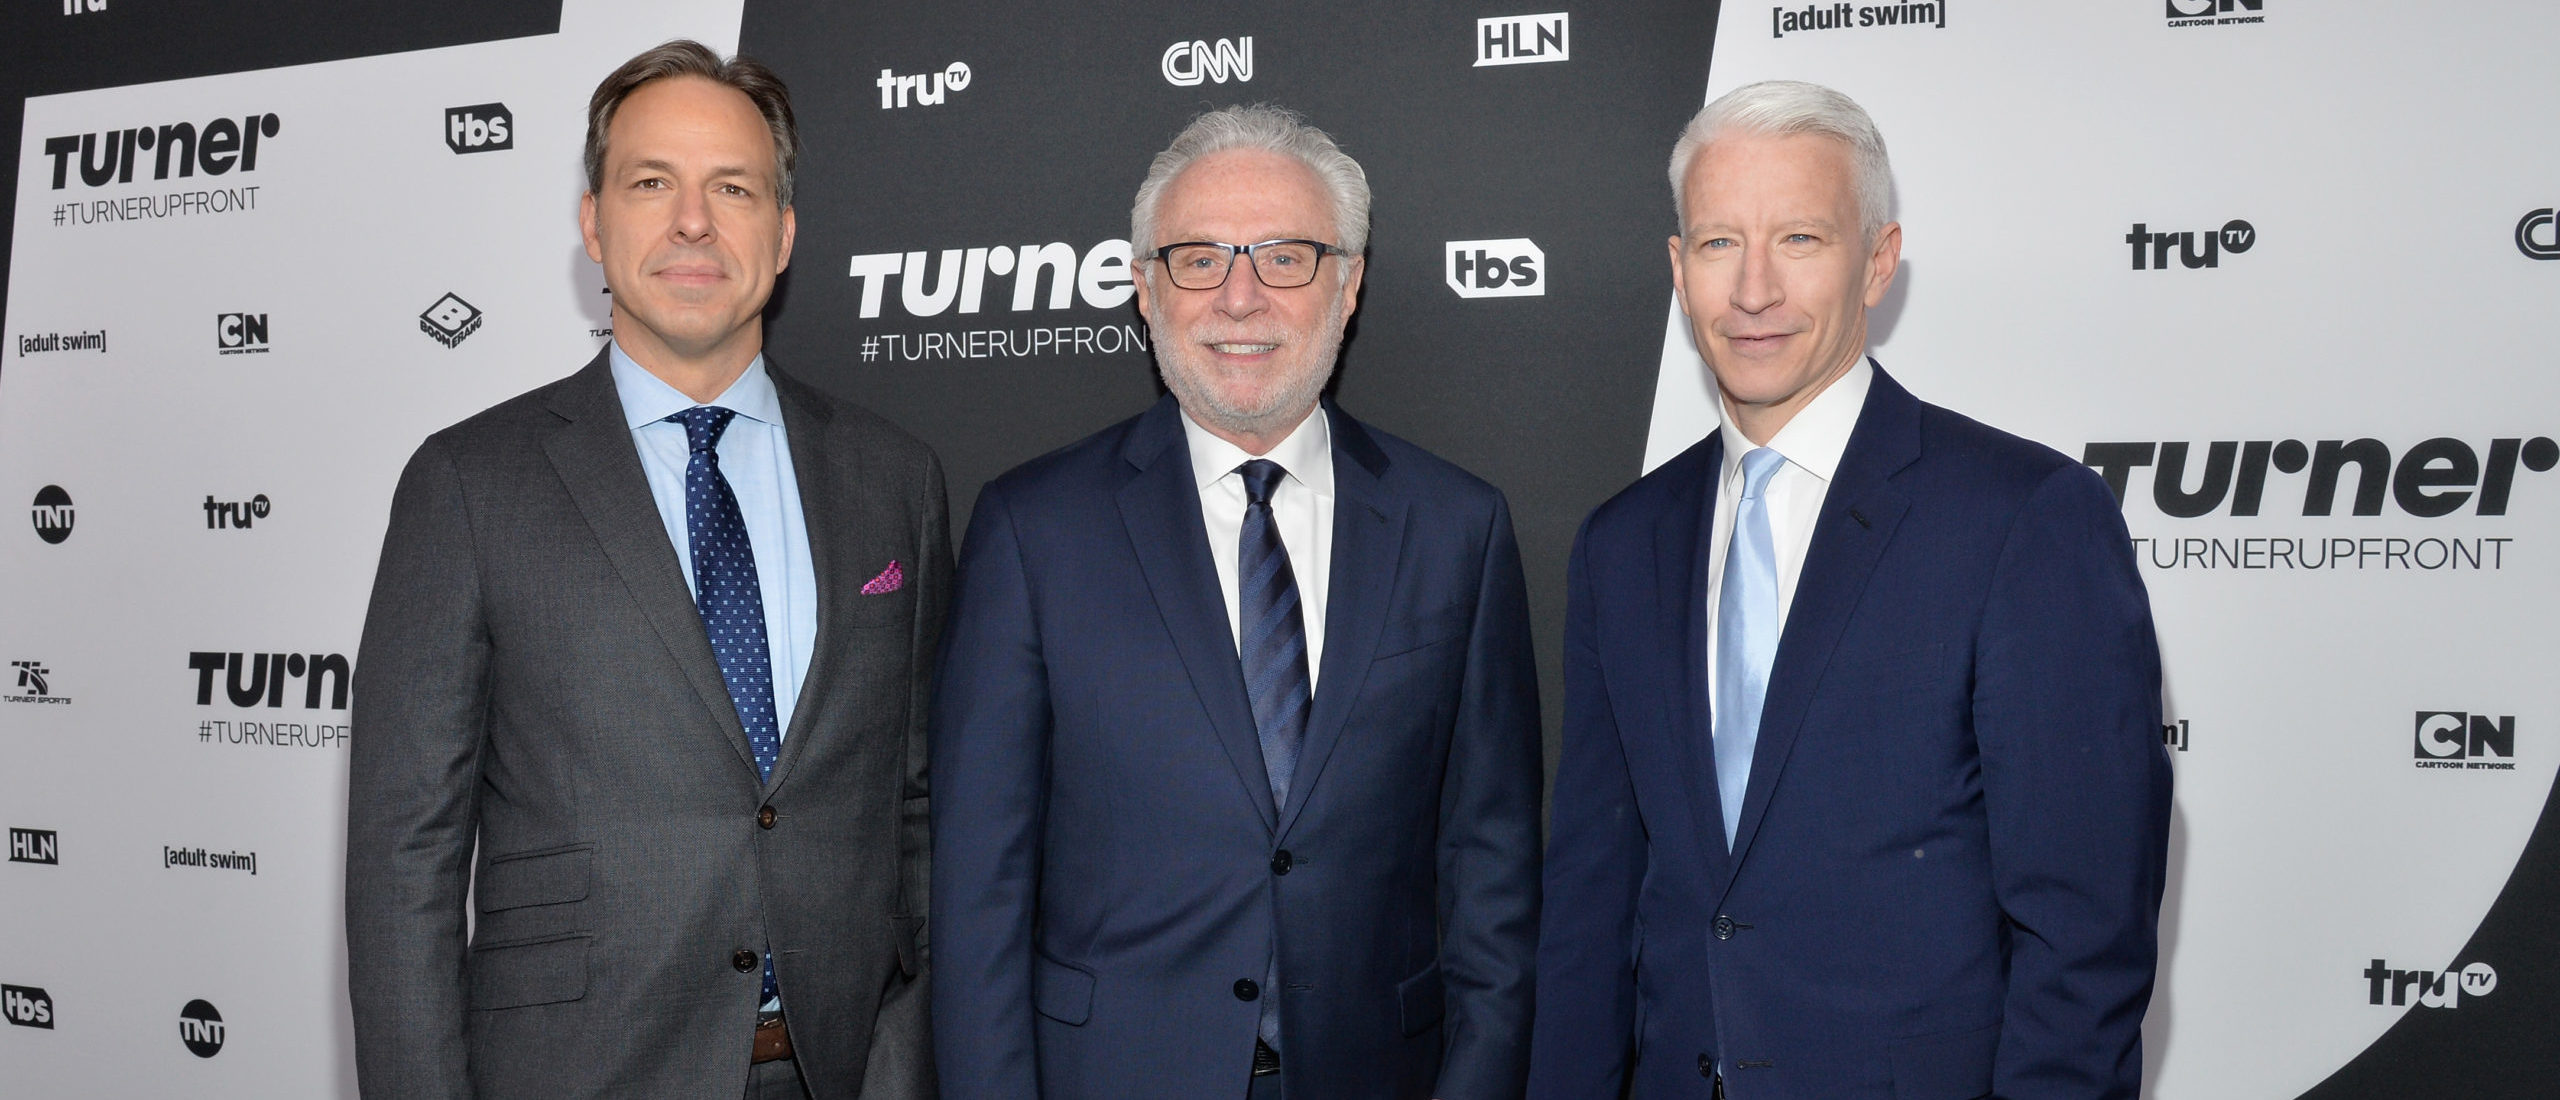 NEW YORK, NY - MAY 18: (L-R) Journalists Jake Tapper, Wolf Blitzer, and Anderson Cooper attend the Turner Upfront 2016 at Nick & Stef's Steakhouse on May 18, 2016 in New York City. (Photo by Slaven Vlasic/Getty Images)